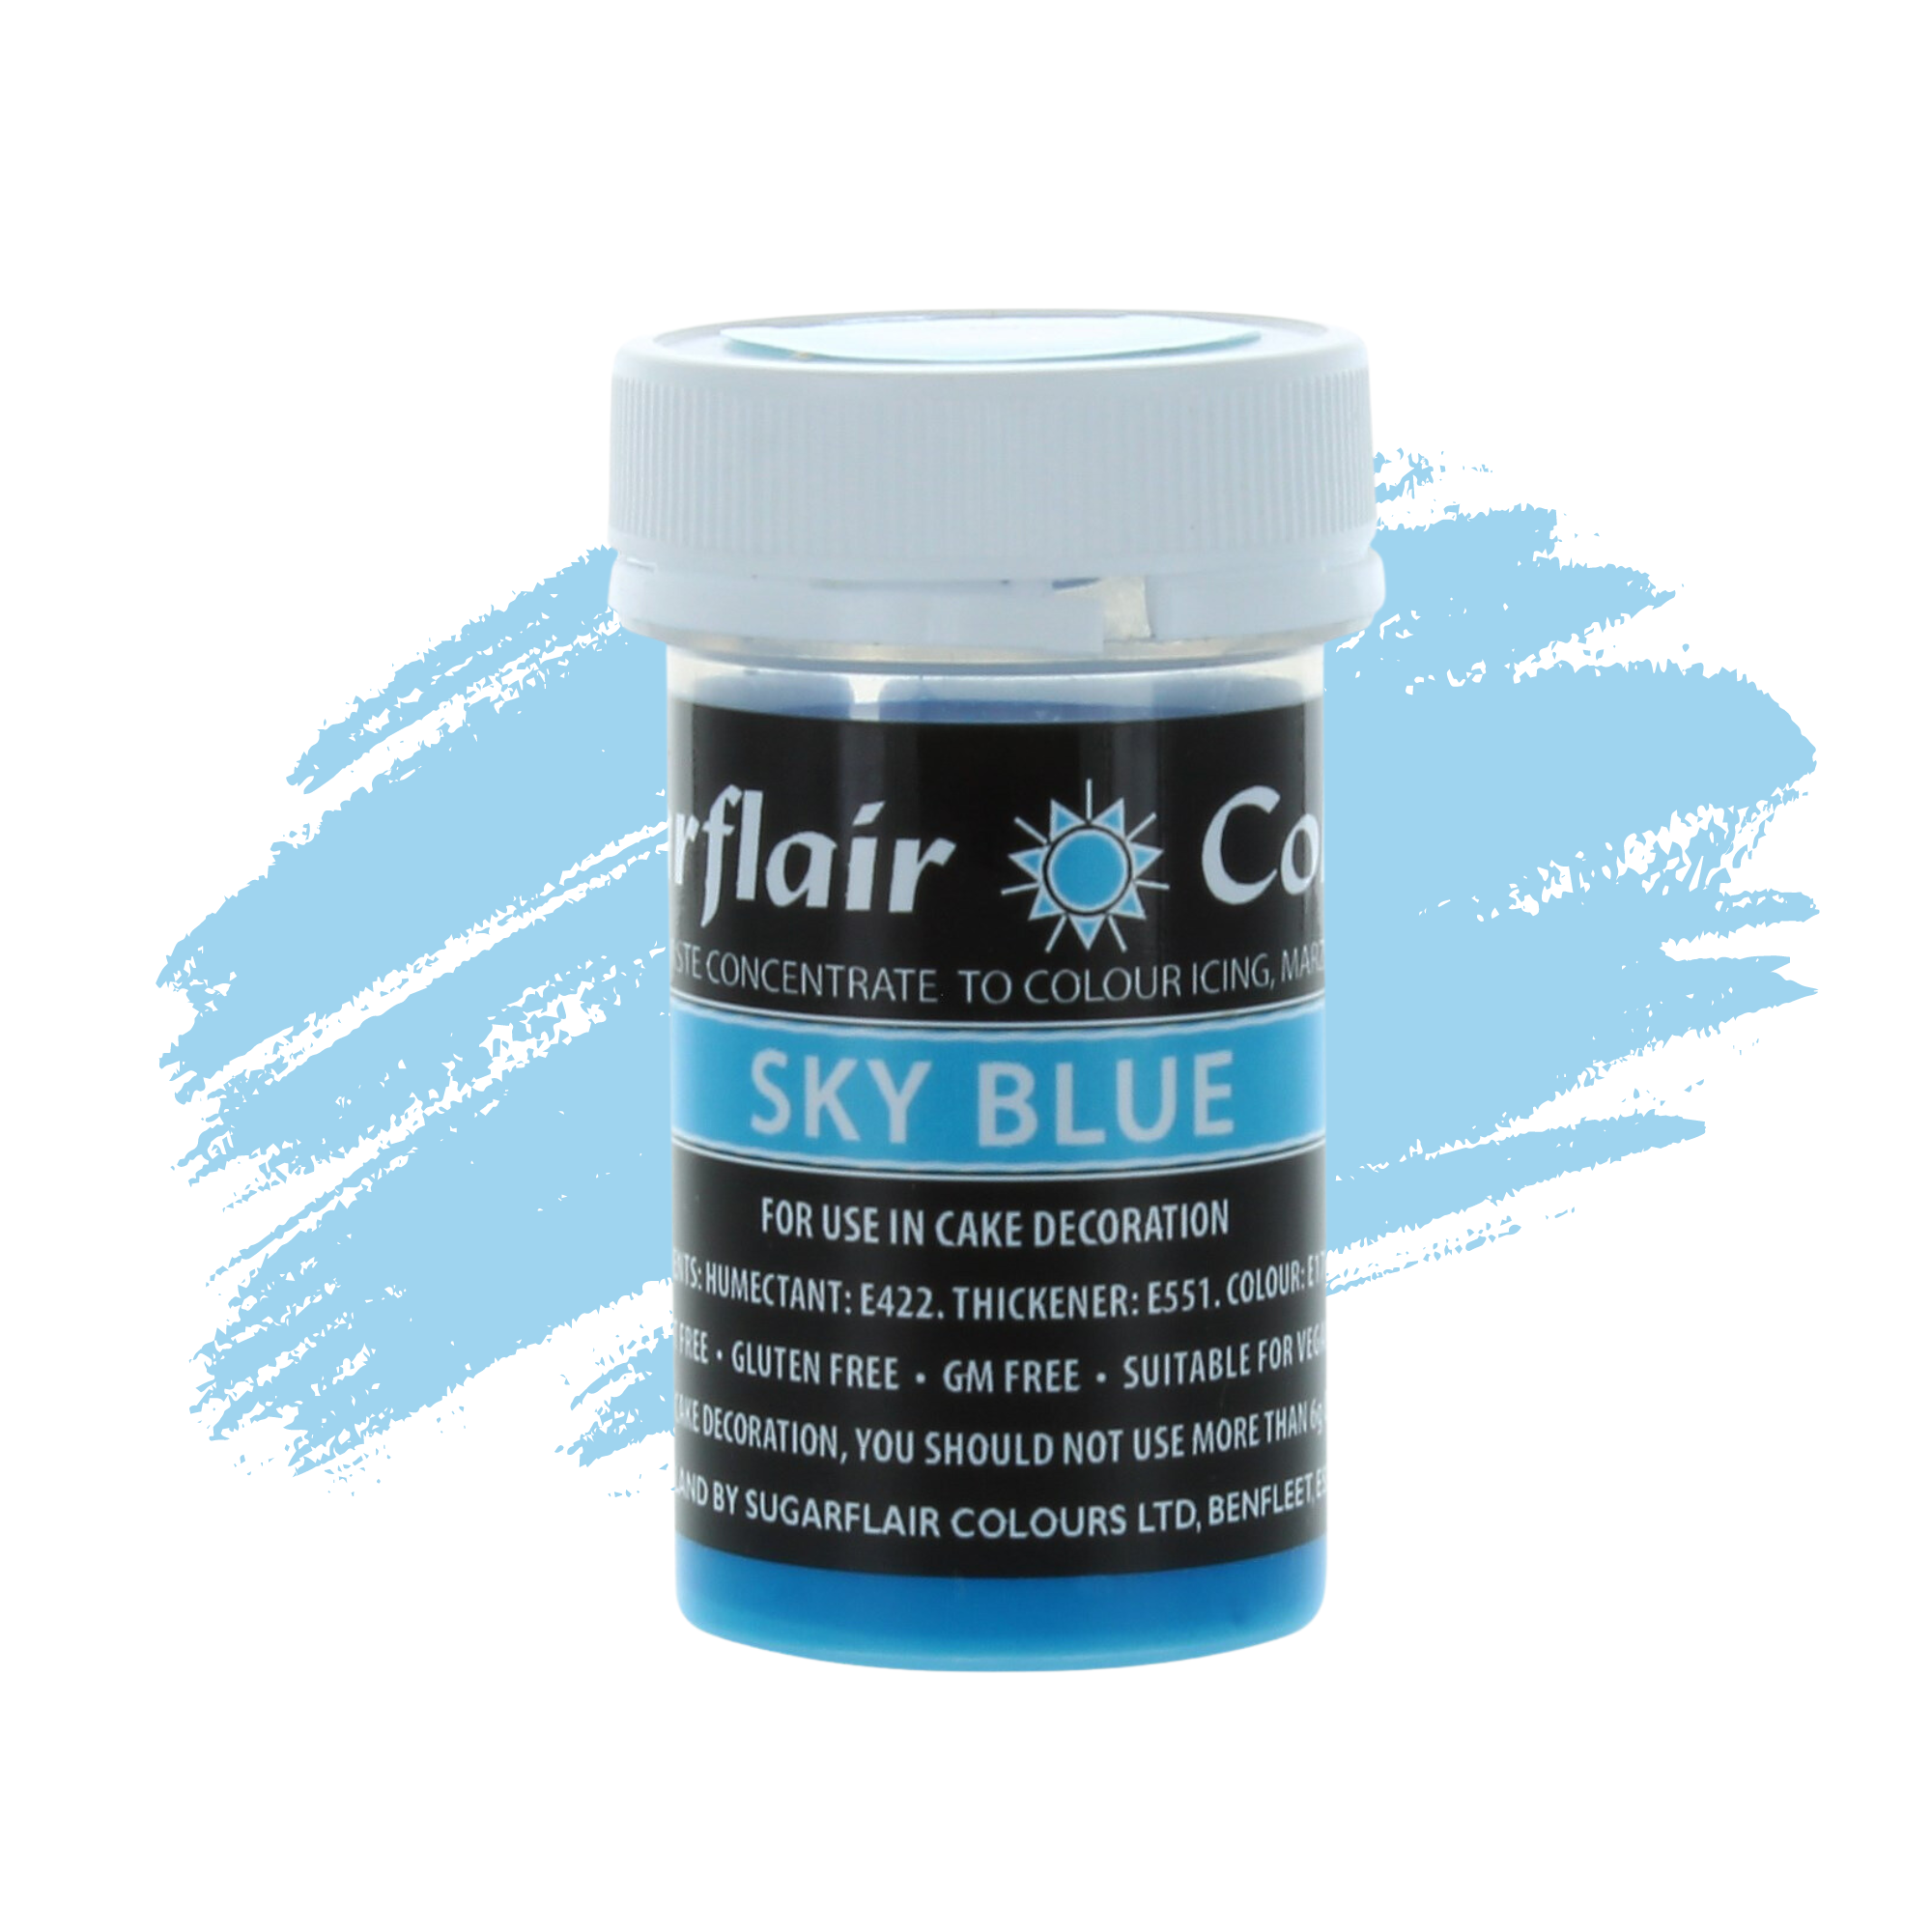 Sugarflair Paste Colours Concentrated Food Colouring - Pastel Sky Blue - 25g